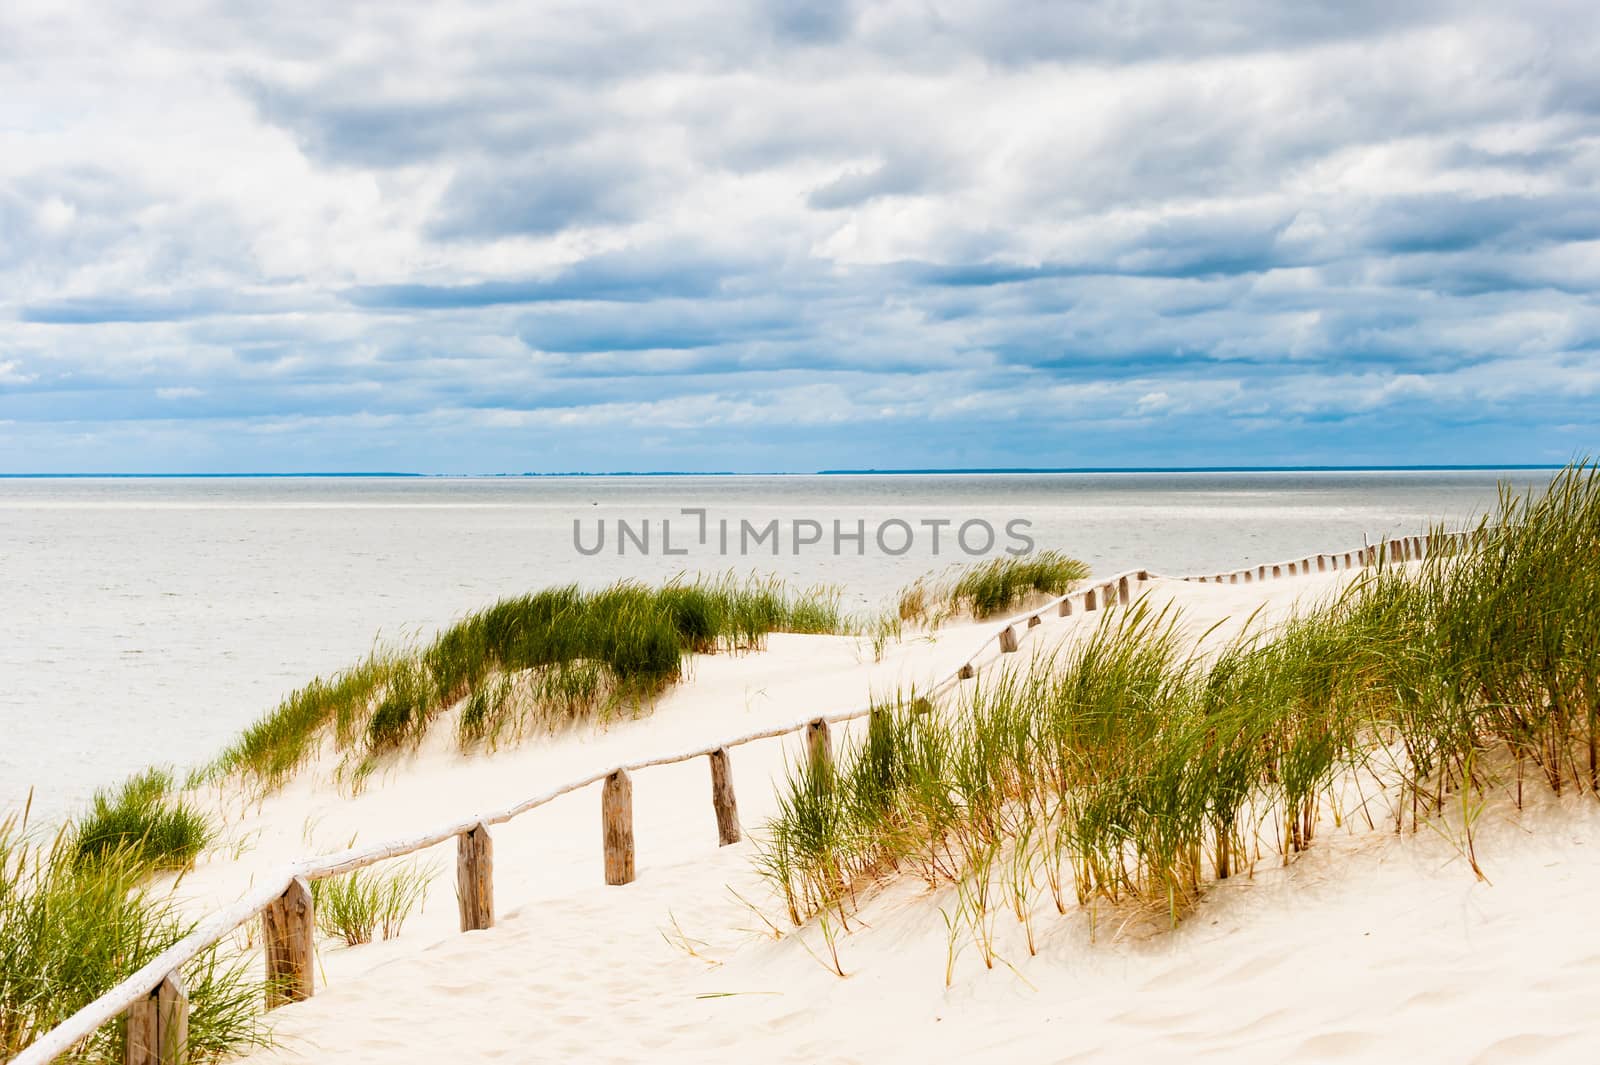 Dune by sea with visible wooden fence, green plants and stormy clouds in background, horizontal.